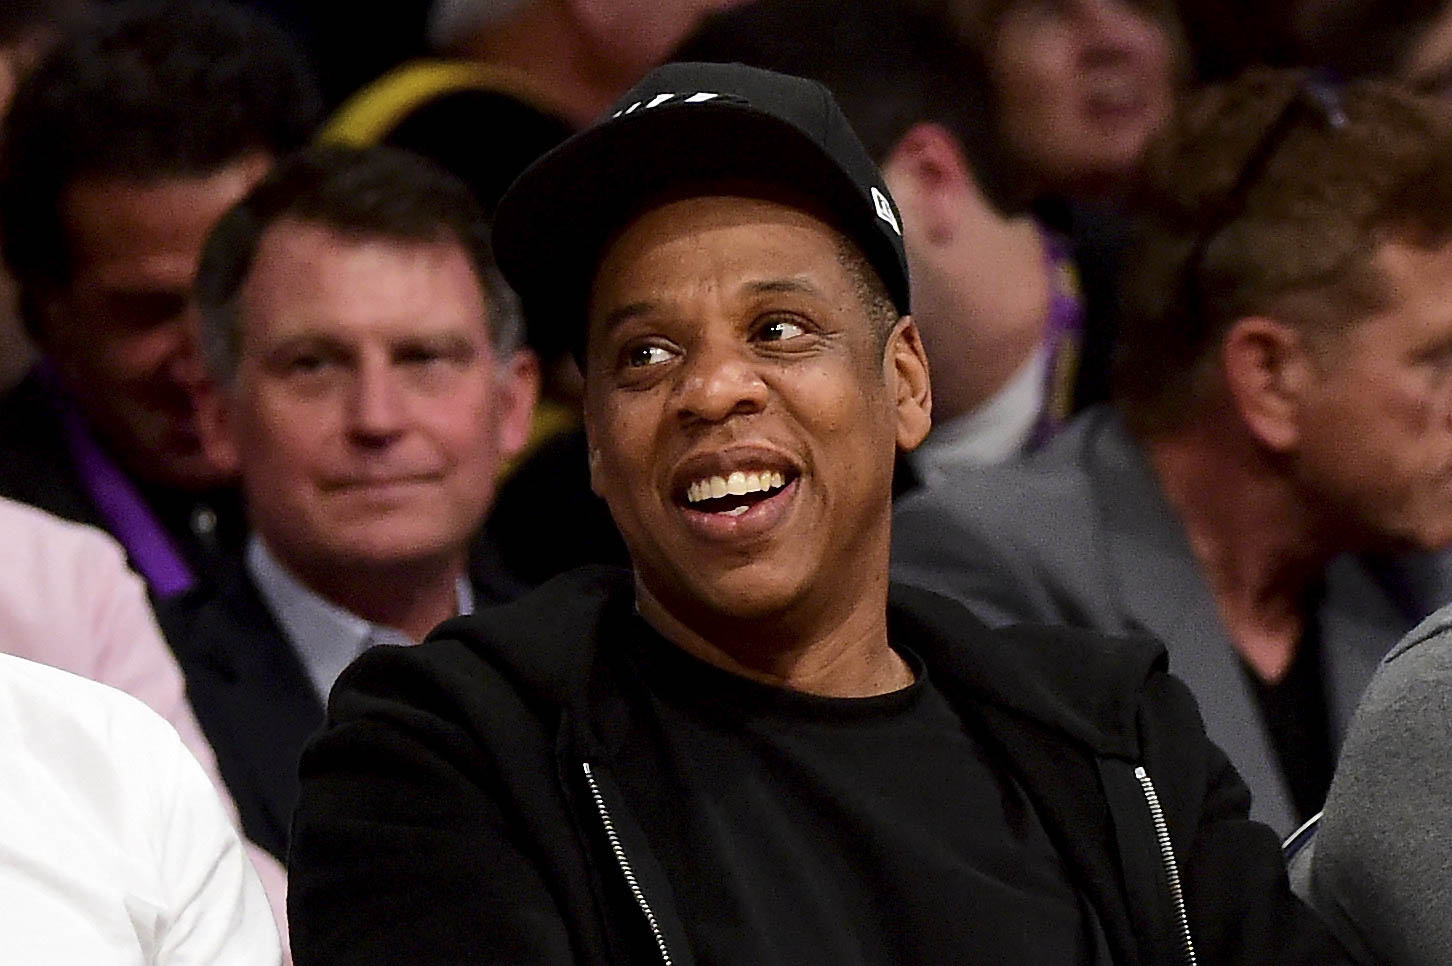 Jay Z likes $300 champagne. So he buys the company